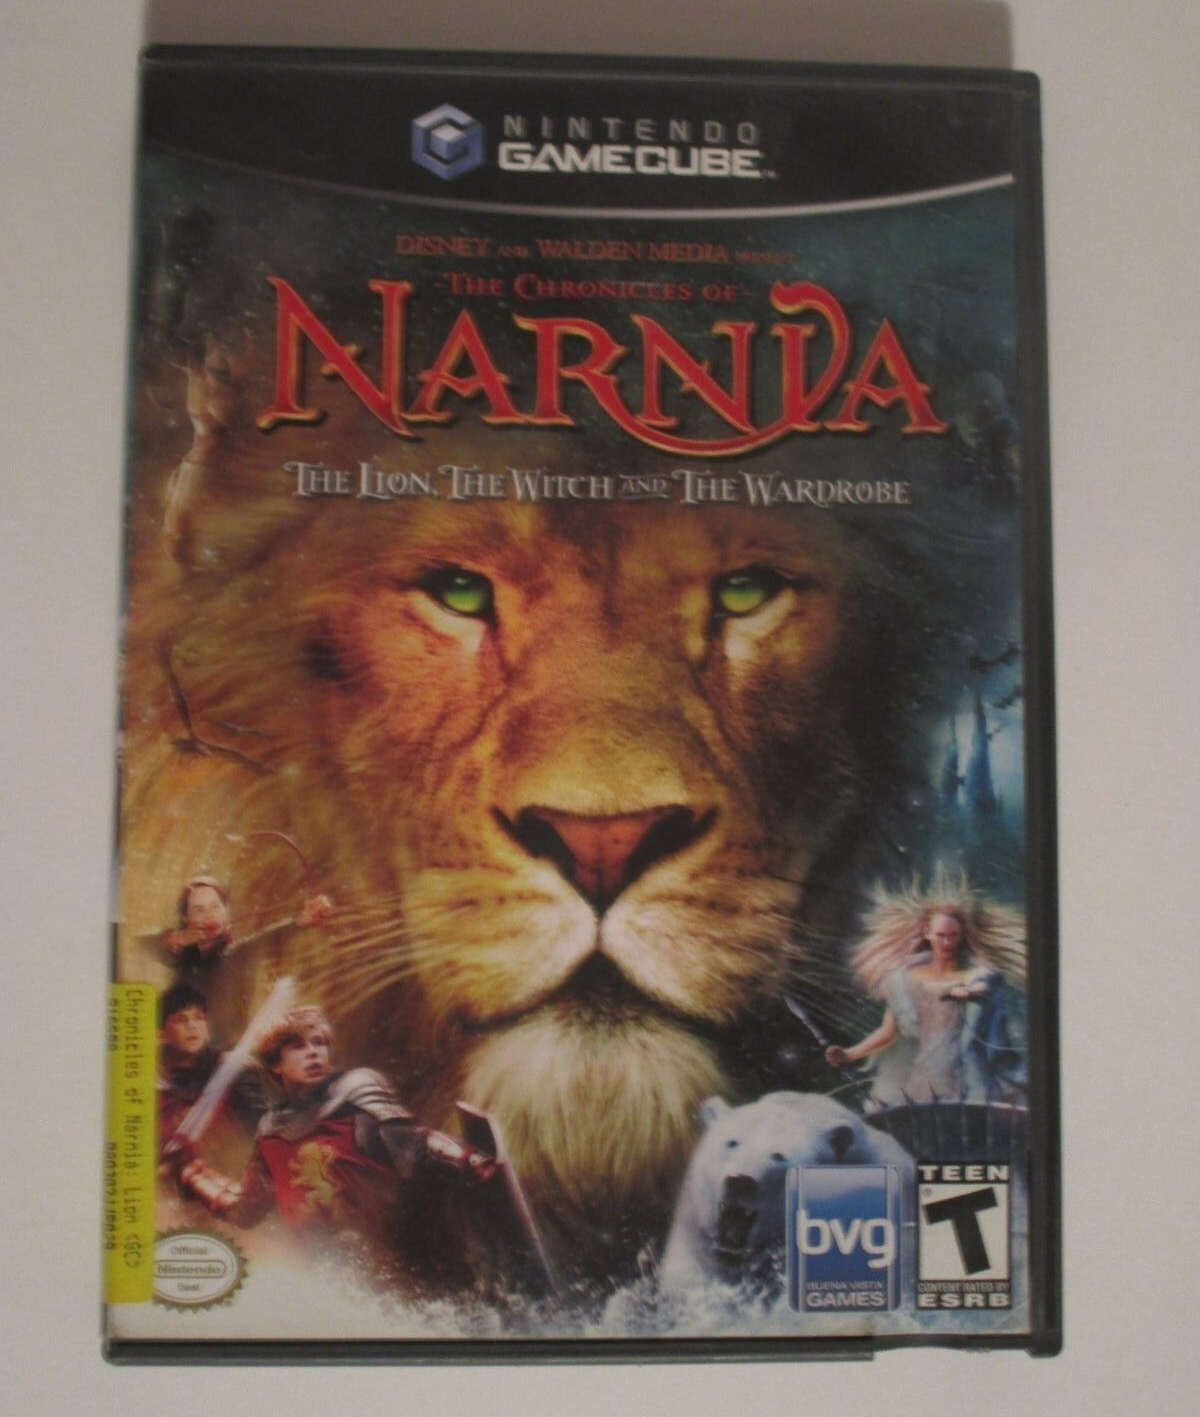 Primary image for The Chronicles of Narnia: The Lion, The Witch and The Wardrobe (Nintendo GC)